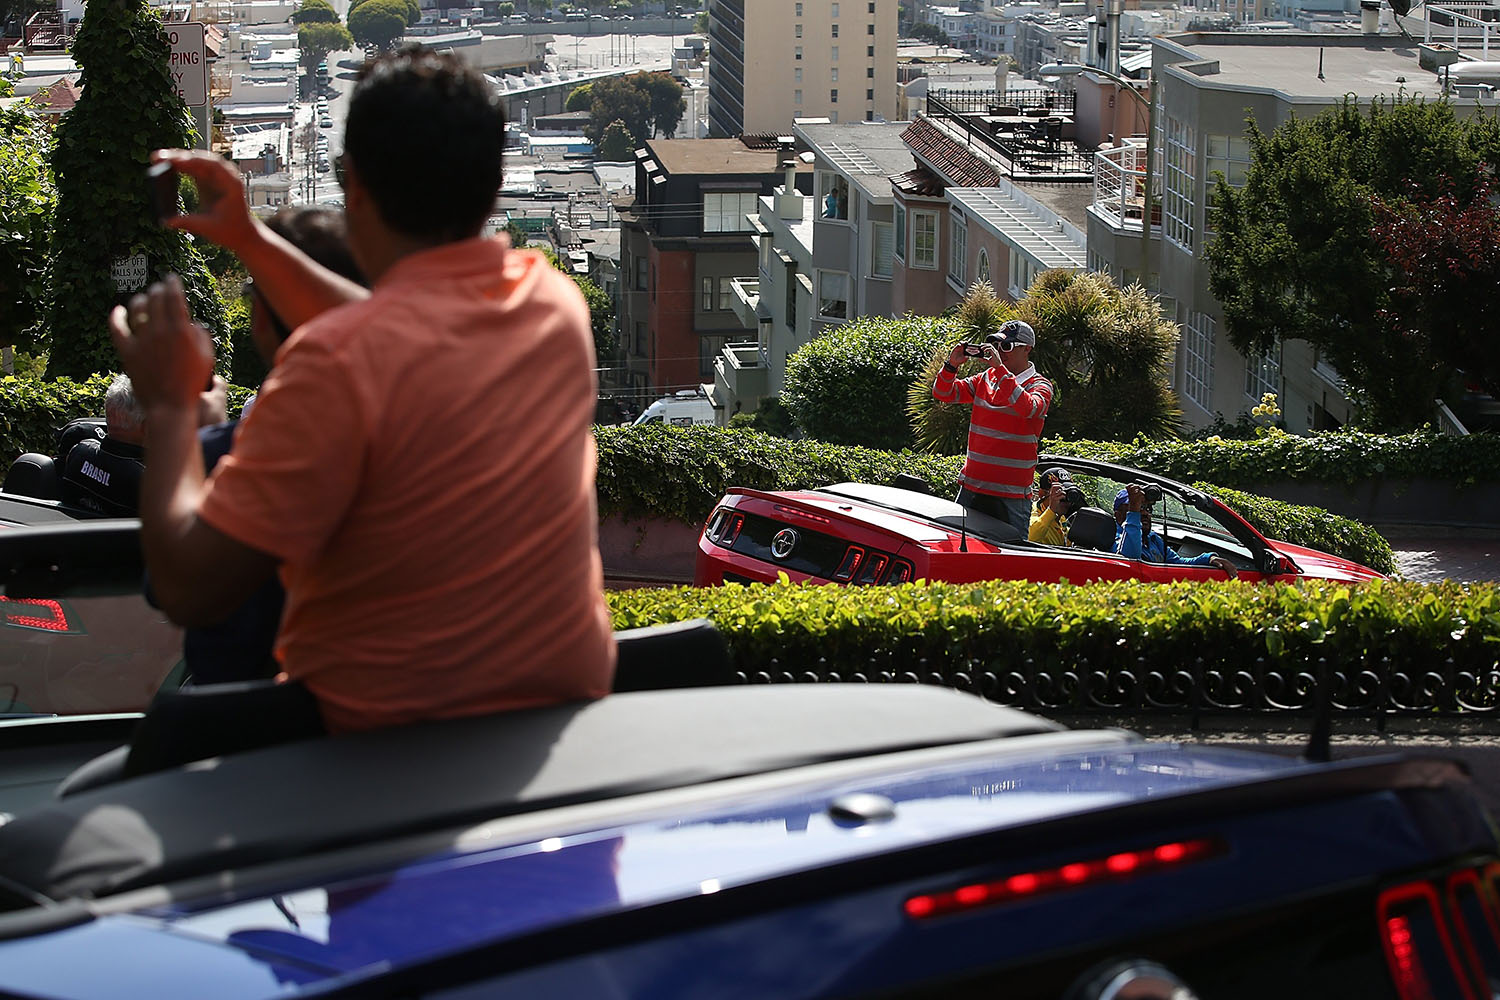 Tourists take pictures while driving down Lombard Street in San Francisco, on May 20, 2014.